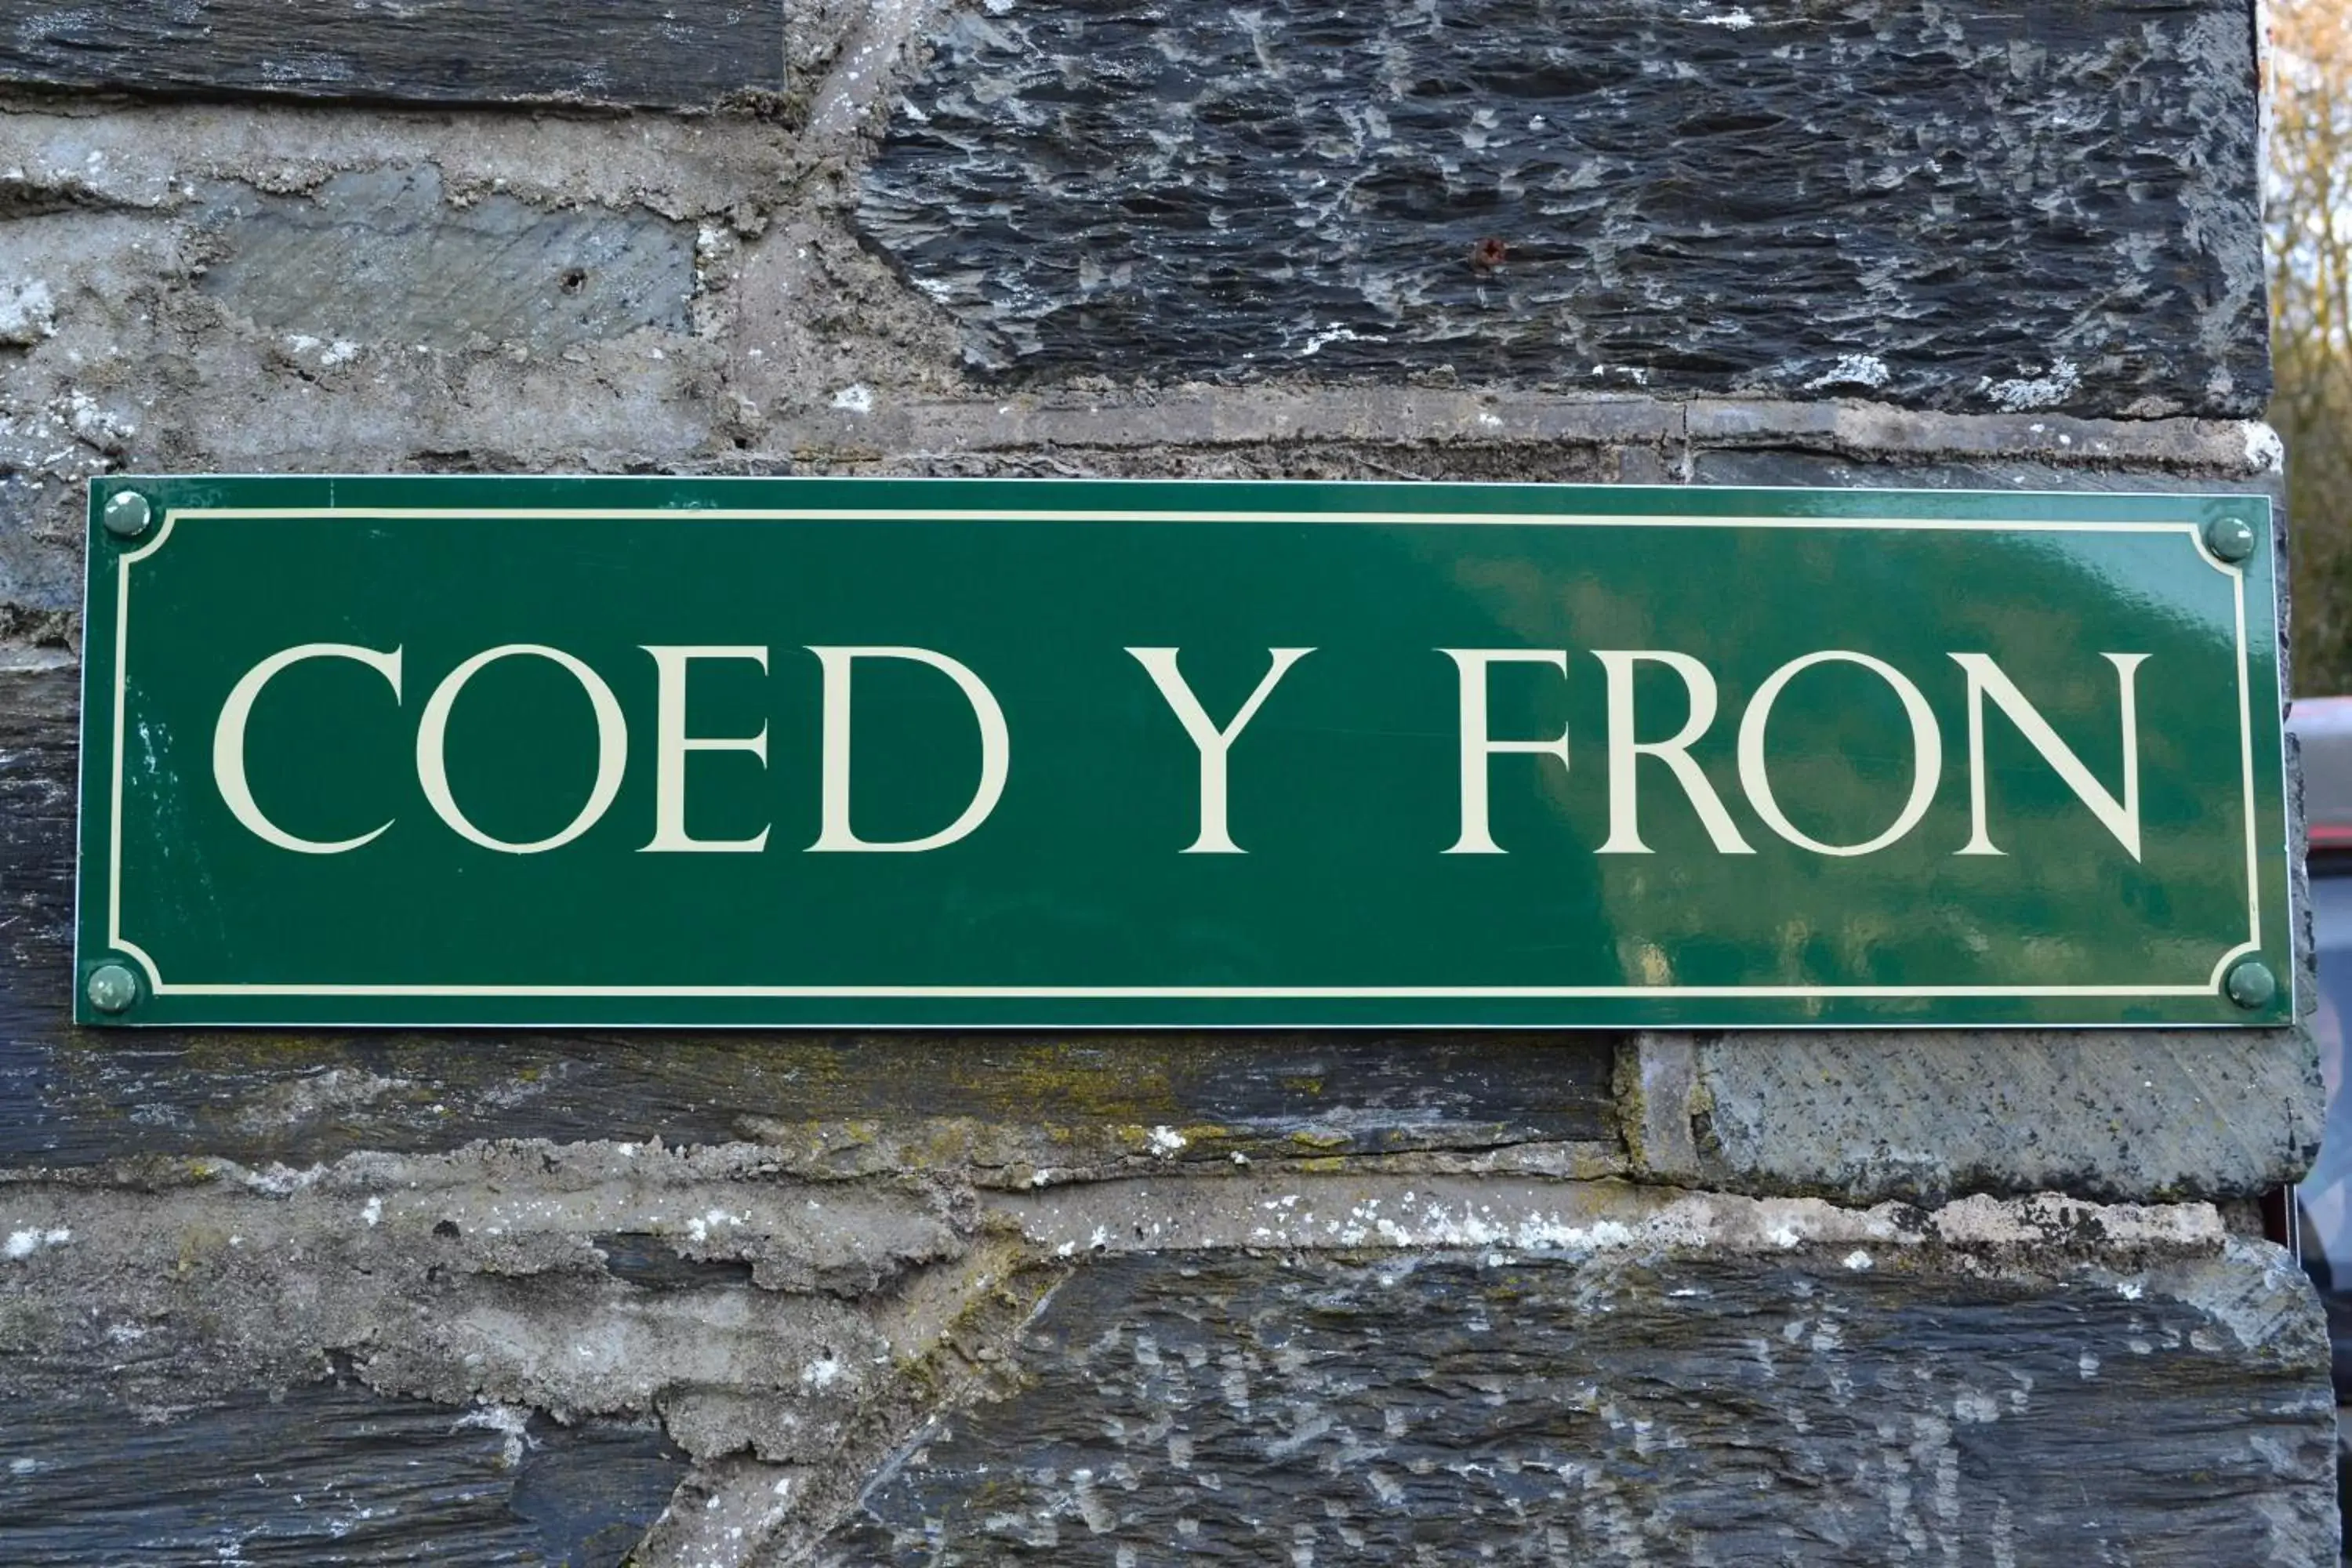 Property logo or sign in Coed-y-Fron